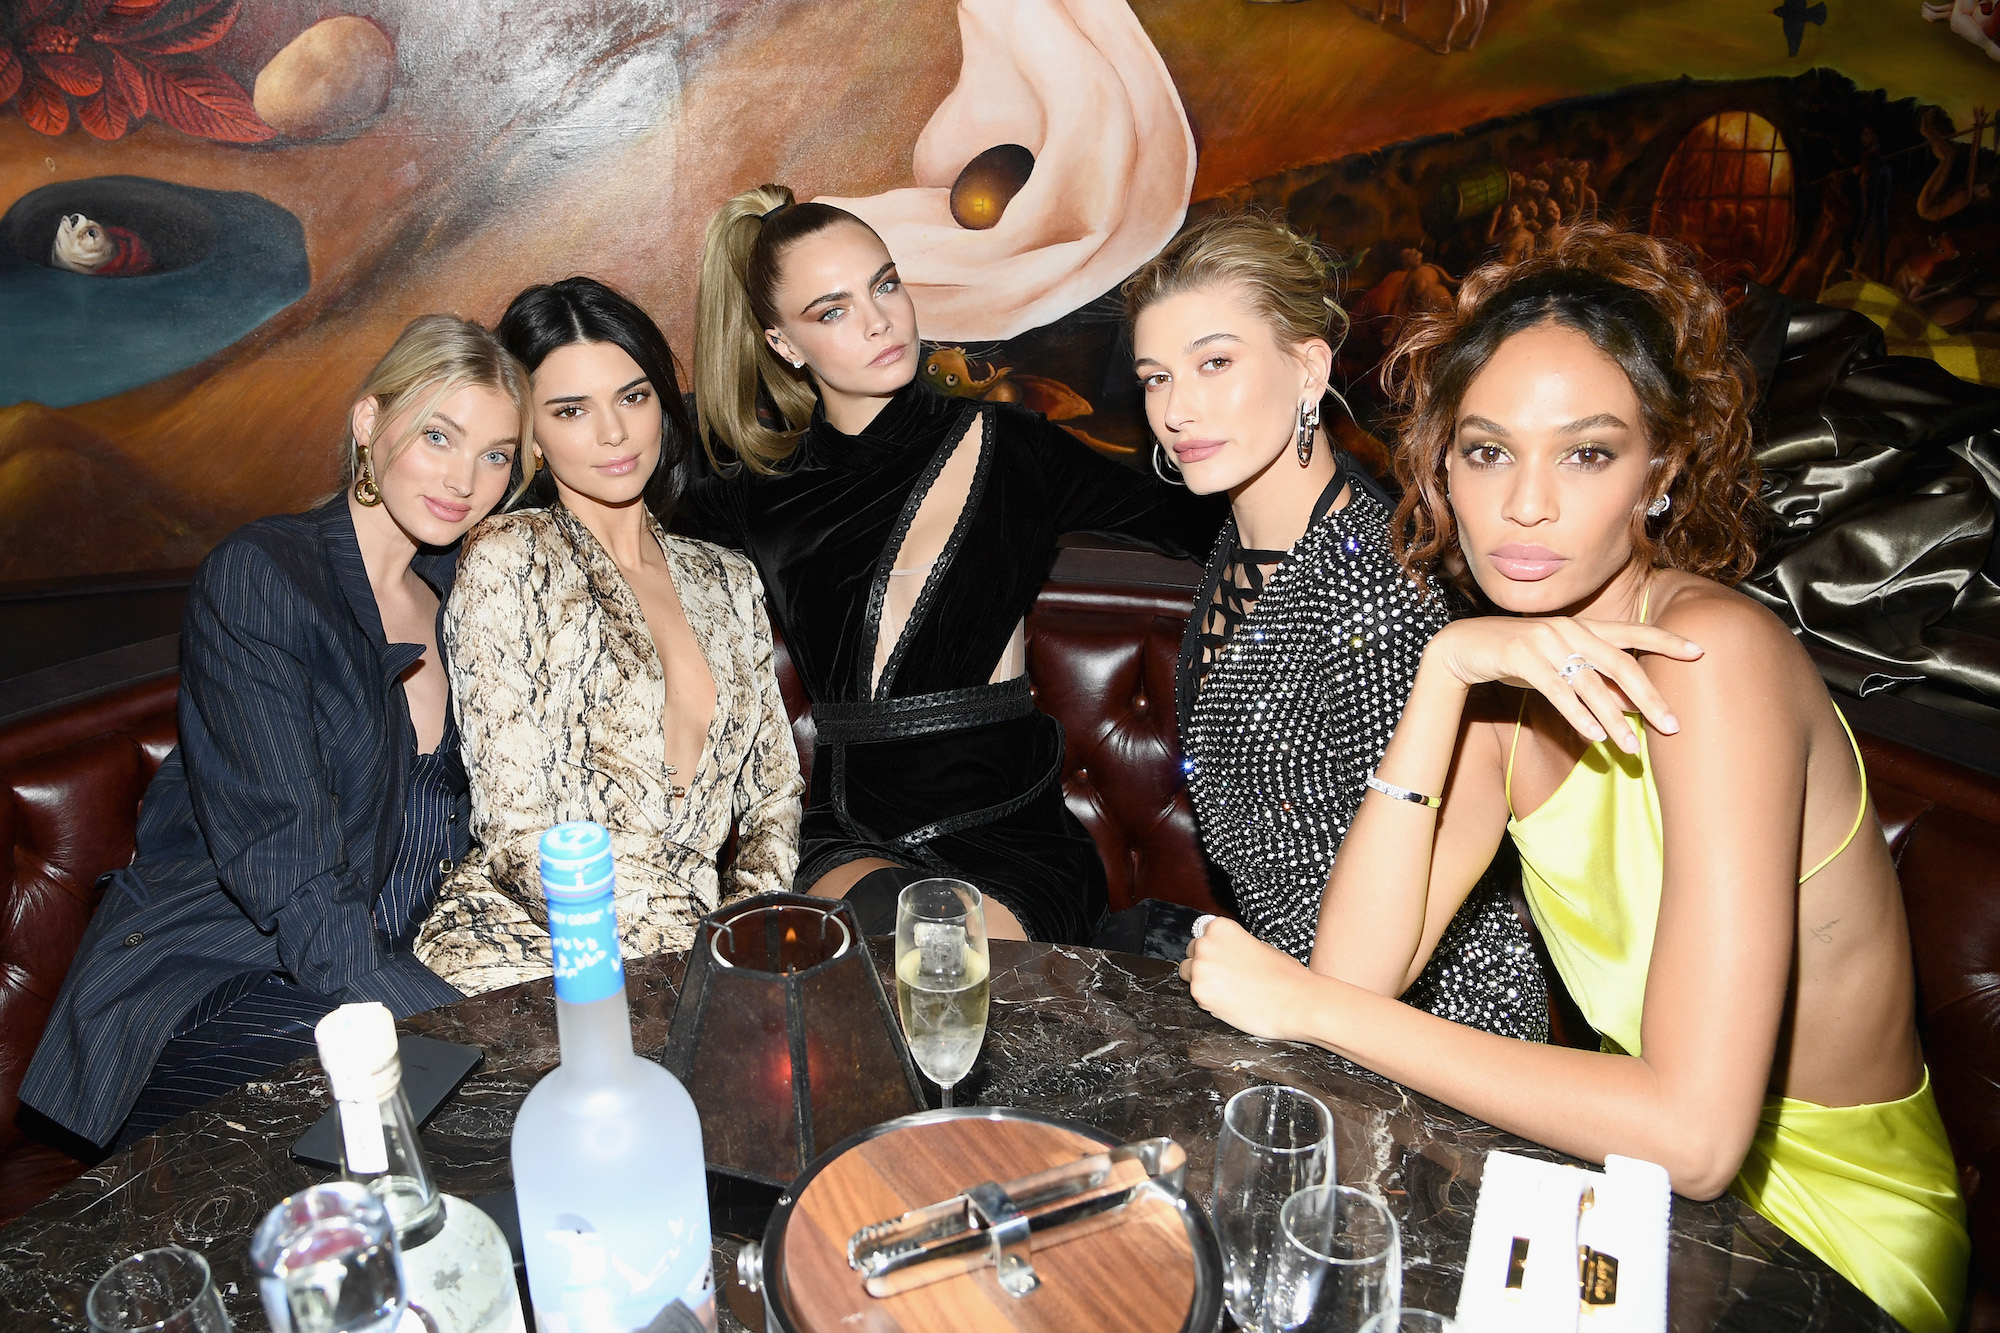 (L-R) Elsa Hosk, Kendall Jenner, Cara Delevingne, Hailey Bieber, and Joan Smalls sitting in a booth at a restaurant